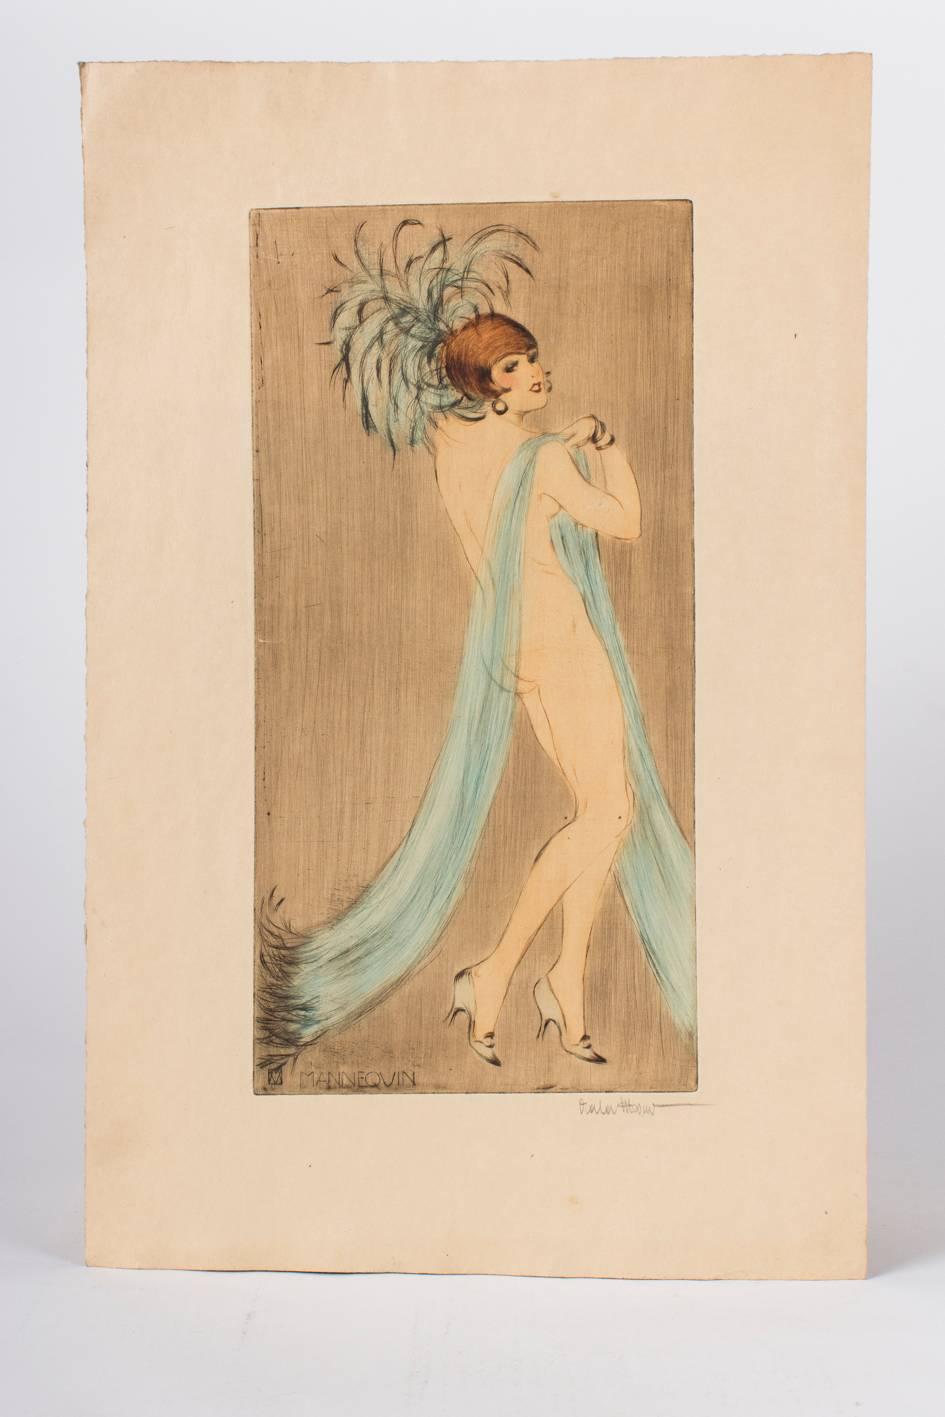 Vala Moro (1907), Vienna 
Art Deco dancing nude “Mannequin”, circa 1924 
Original colored etching, pencil-signed lower right and in etching “VALA MORO”, titled “MANNEQUIN”

Vala Moro (1907) was an Austrian-Hungarian dancer and artist. She lived